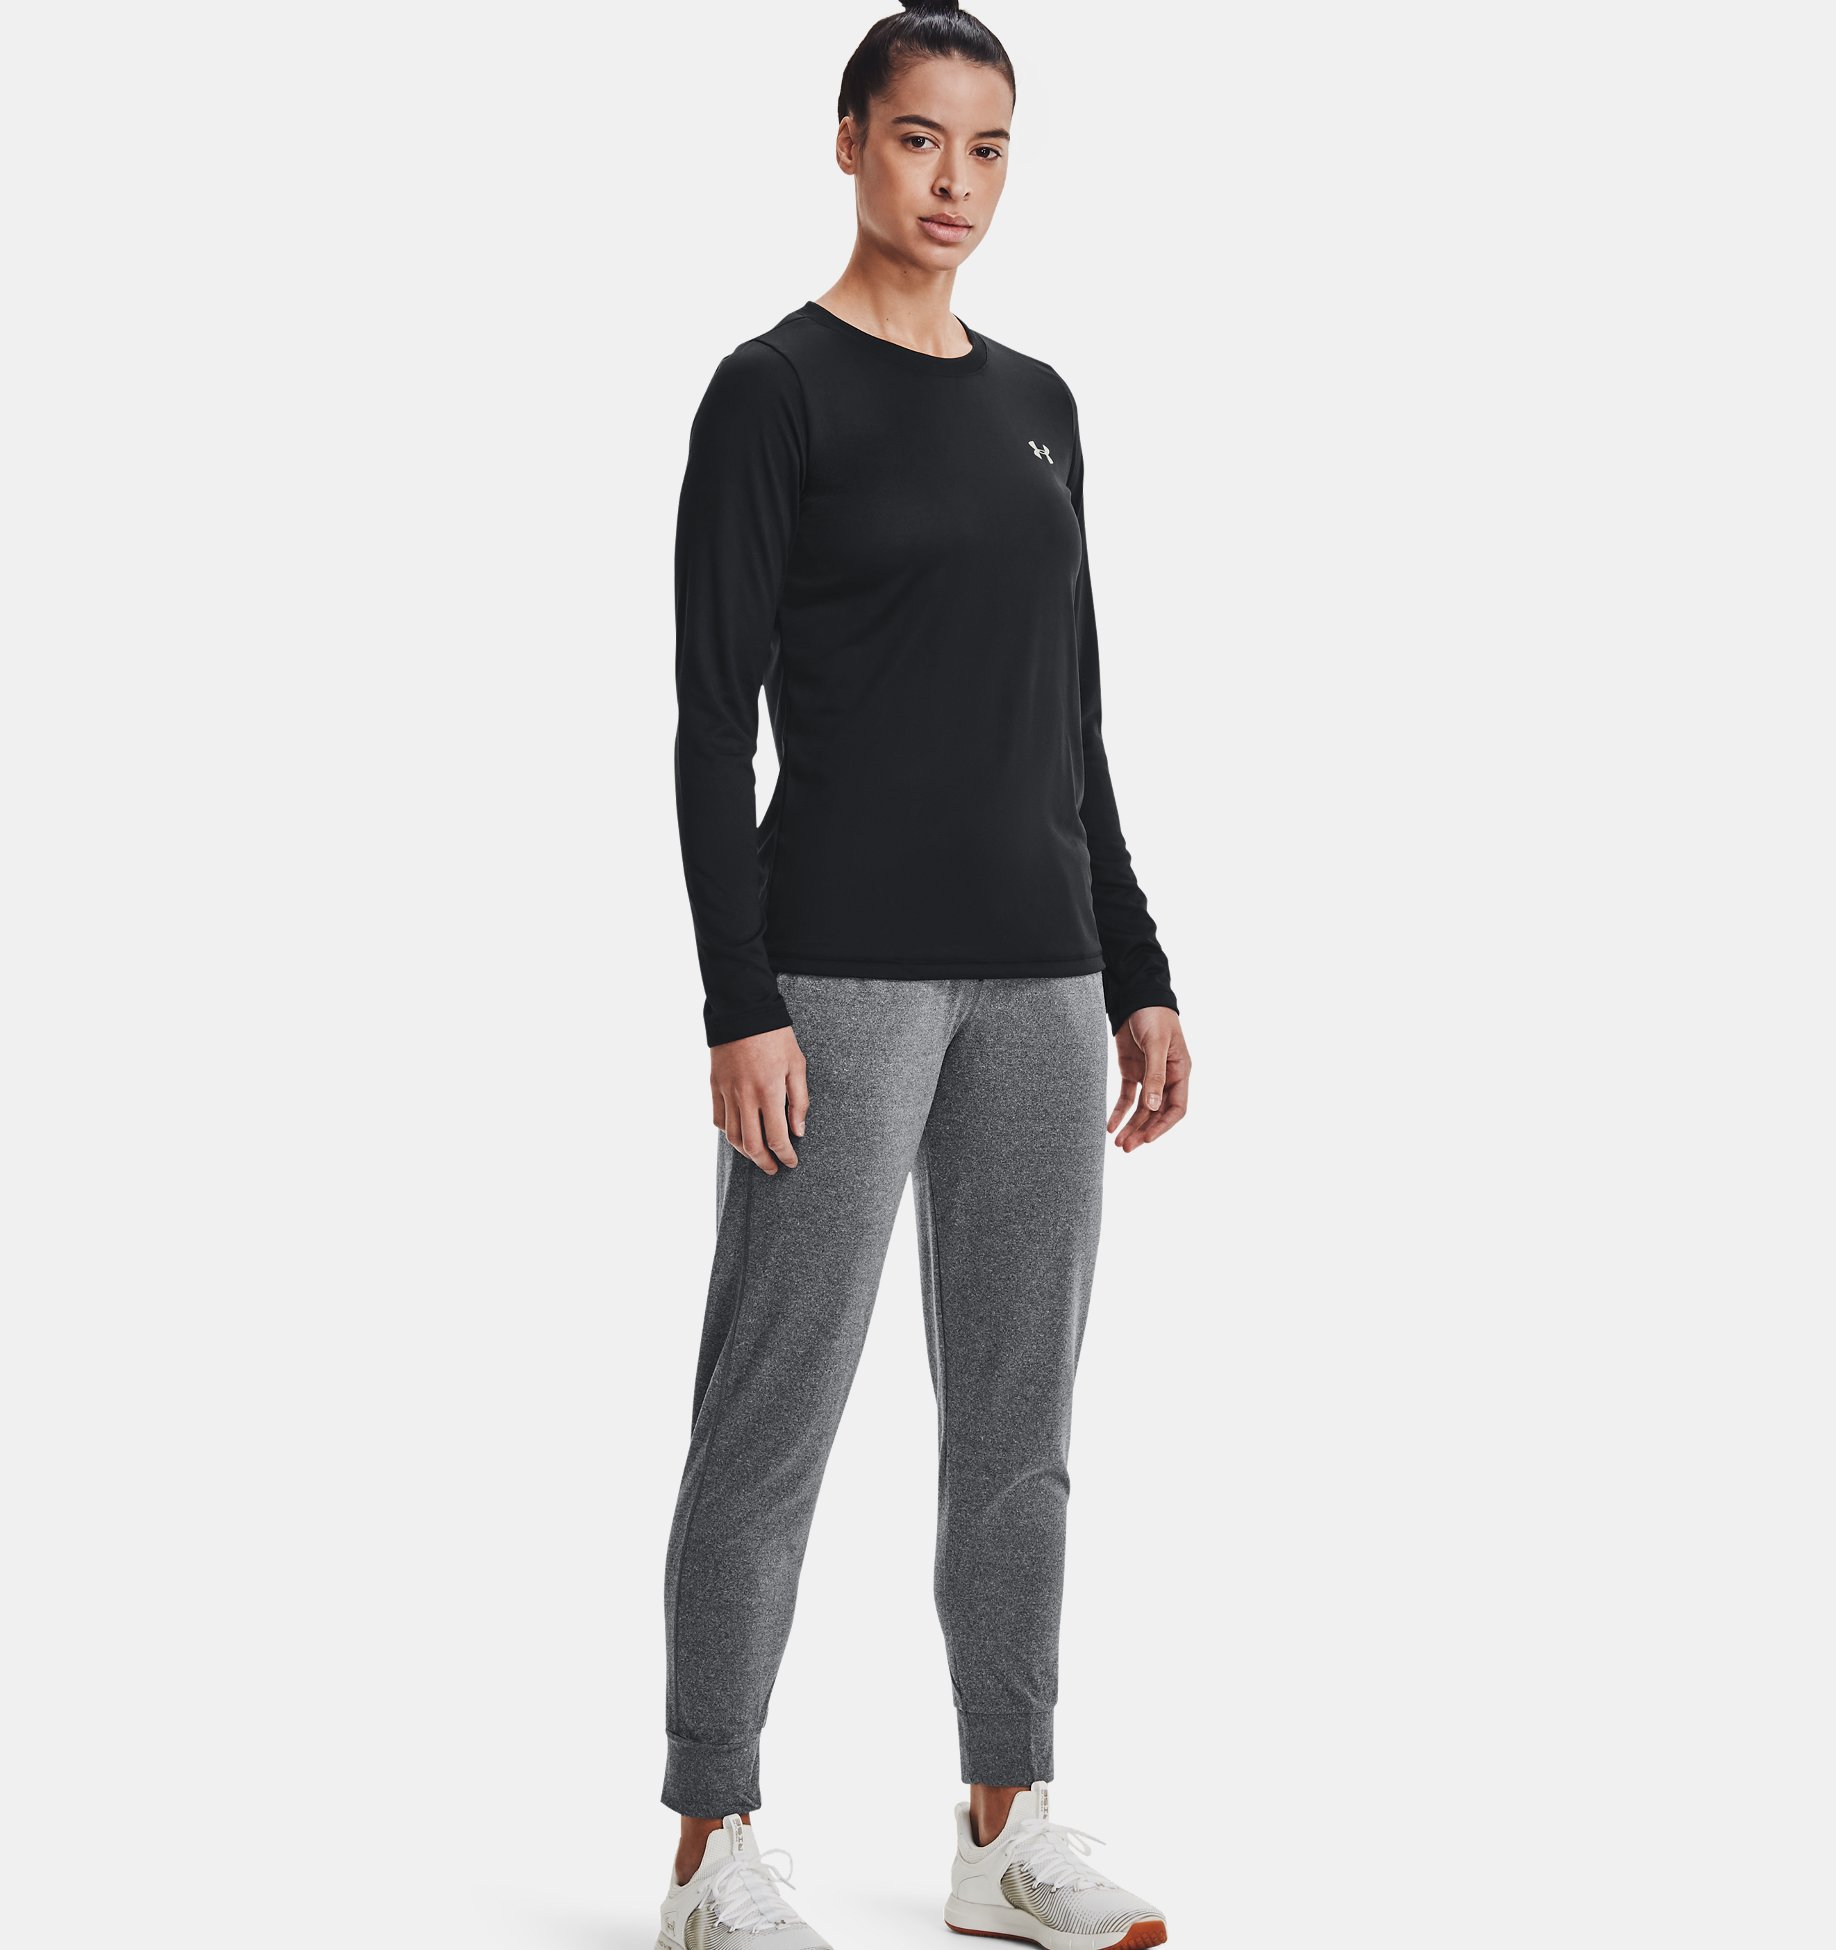 Super-Soft Women’s Tracksuit Bottoms with Anti-Odour Technology Under Armour Womens Tech Pant 2.0 Comfortable and Quick-Drying Yoga Pants 